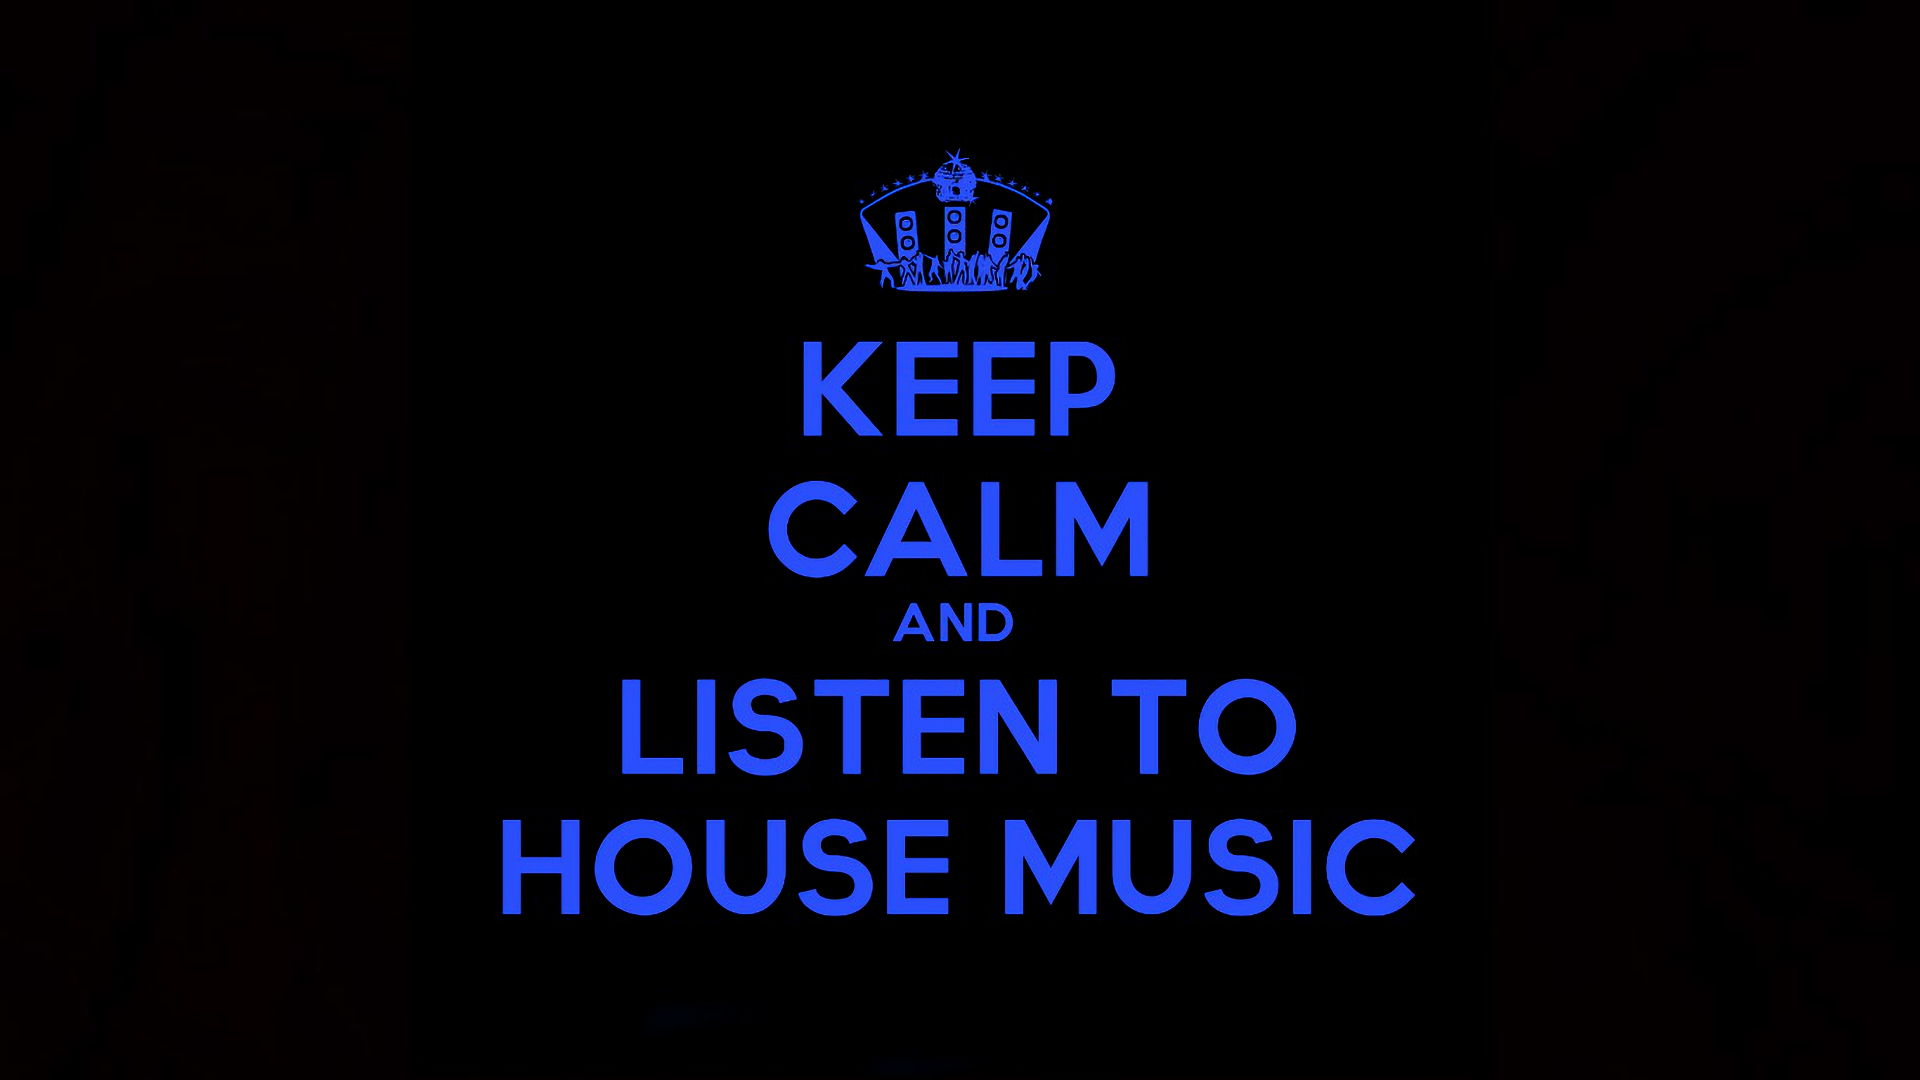 Stay Calm And Listen To House Music HD Wallpaper